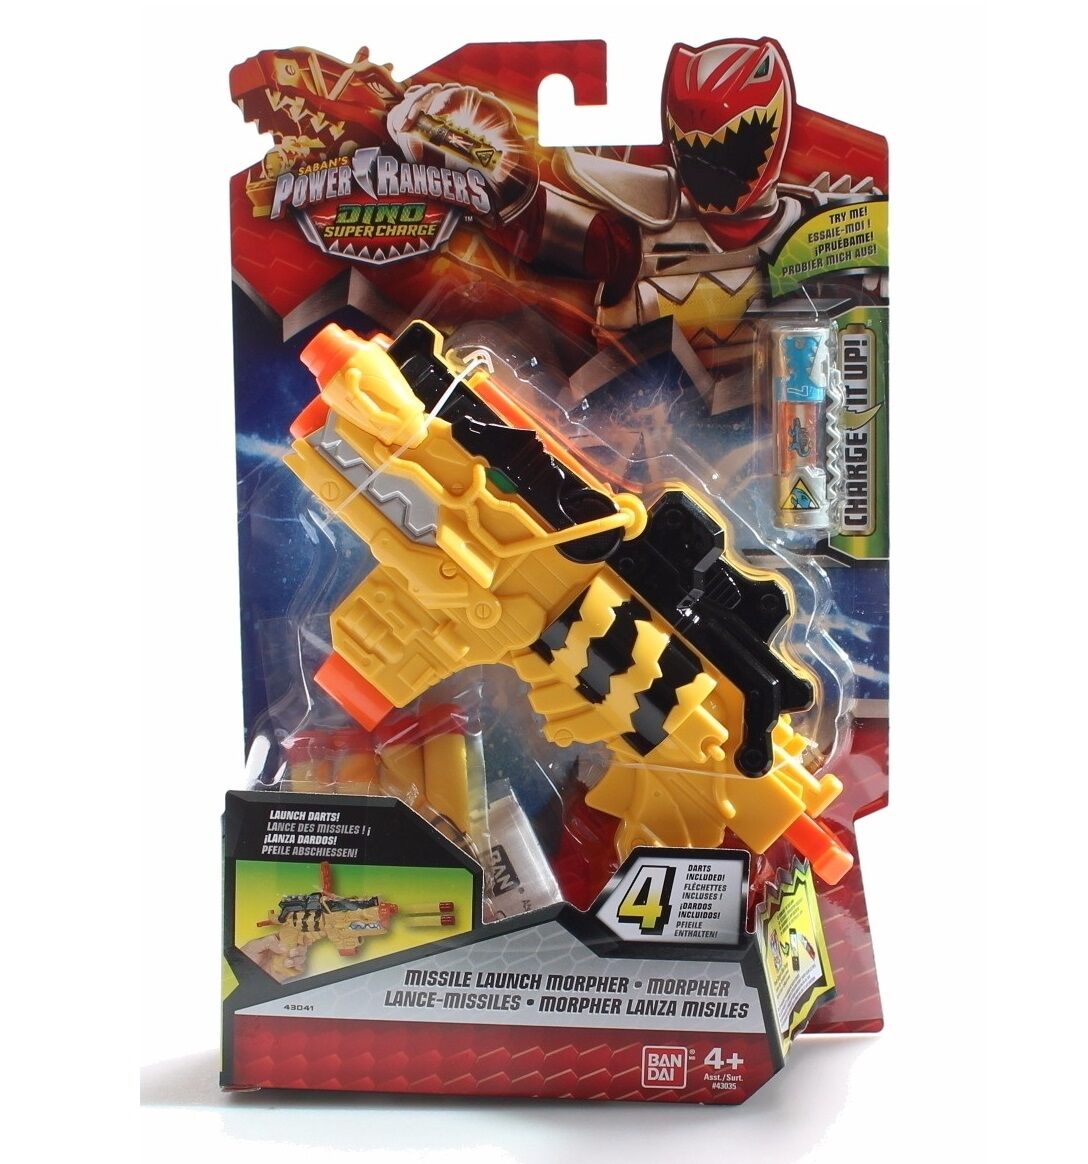 Adore Power Rangers Dino Super Charge Morpher